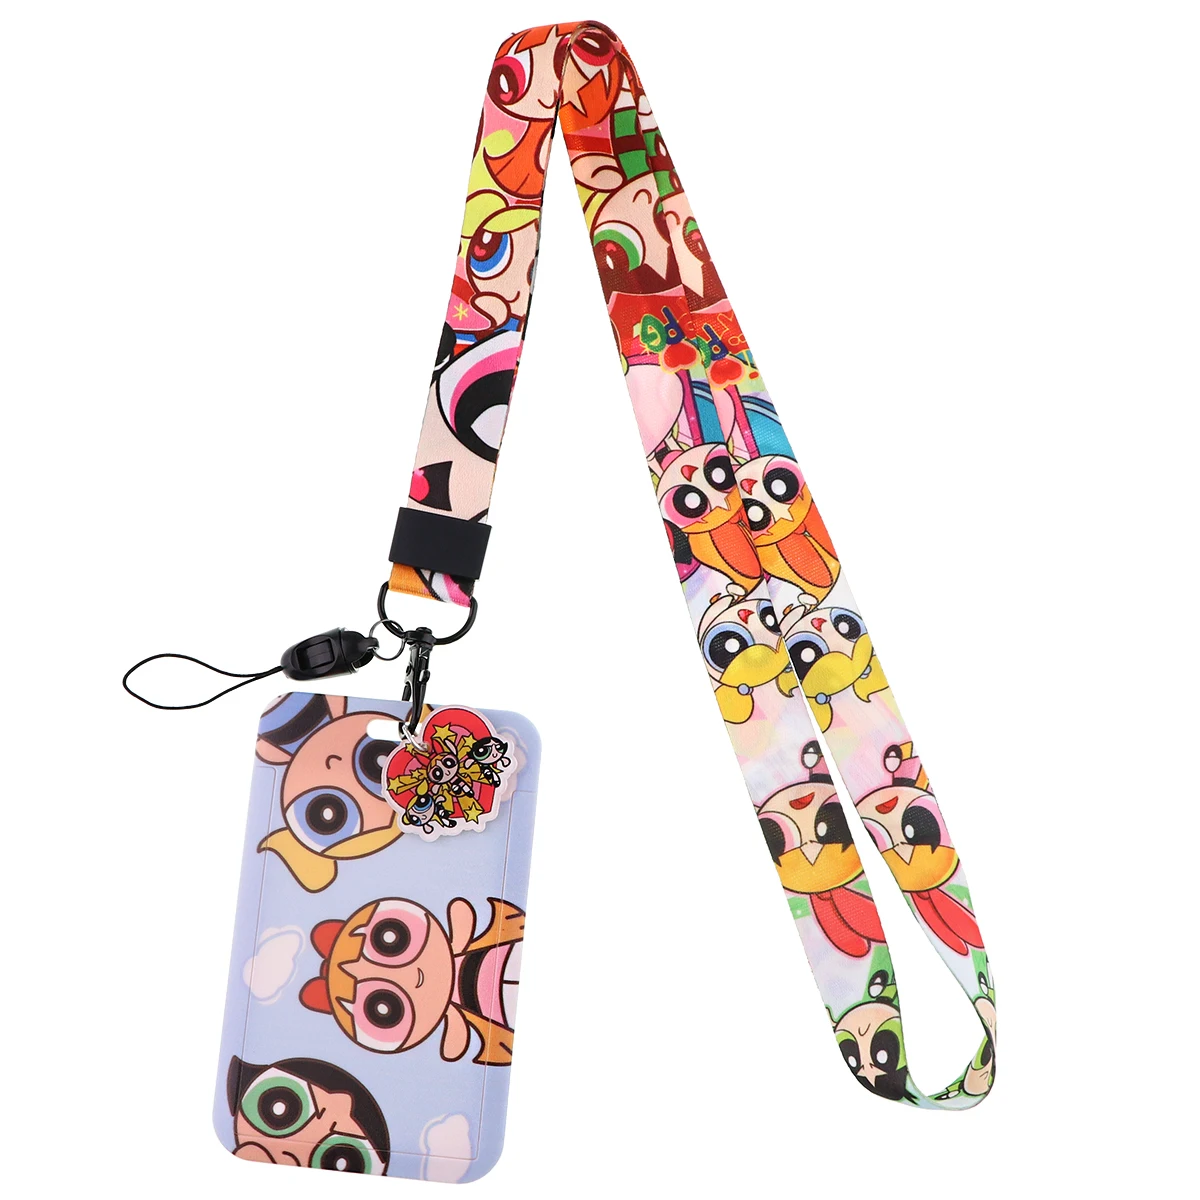 Cute Cartoon Lanyards For Keys Chain ID Credit Card Cover Pass Mobile Phone Charm Neck Straps Badge Holder Accessories Gifts